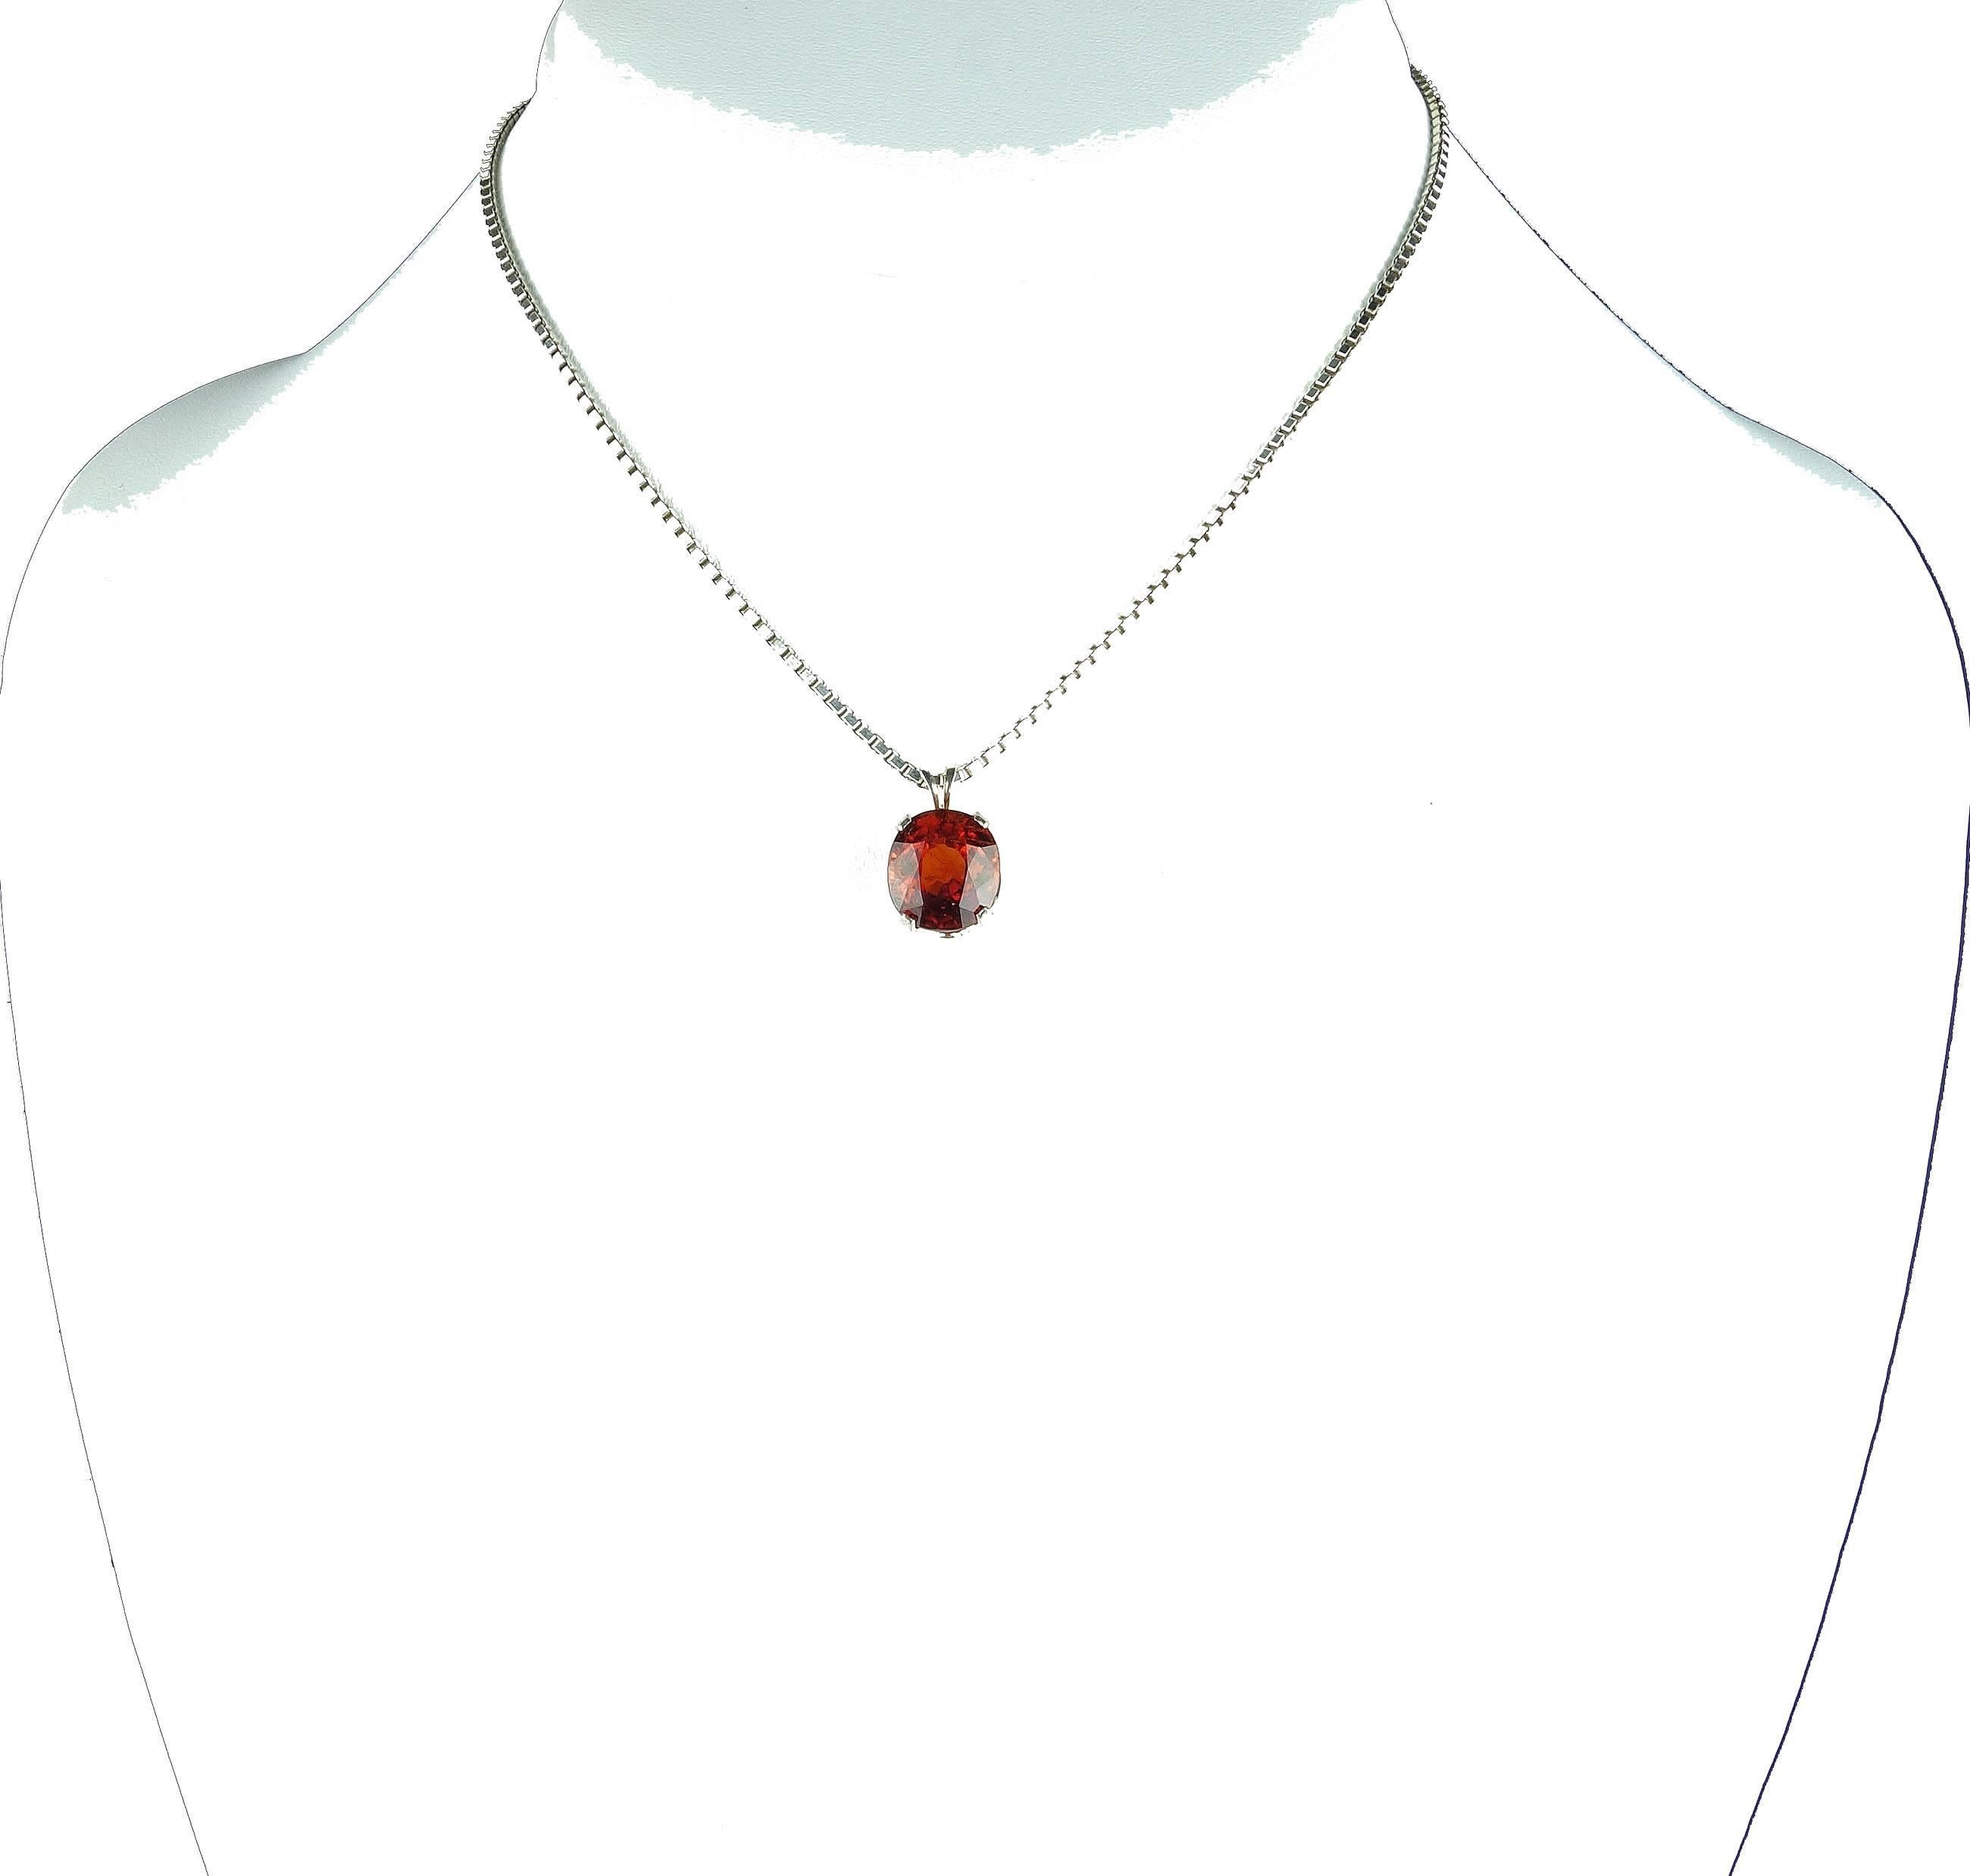 This 6 carat brilliant natural Spessartite Garnet measures 10.7 mm x 9.6 mm and is set in a Sterling Silver pendant.